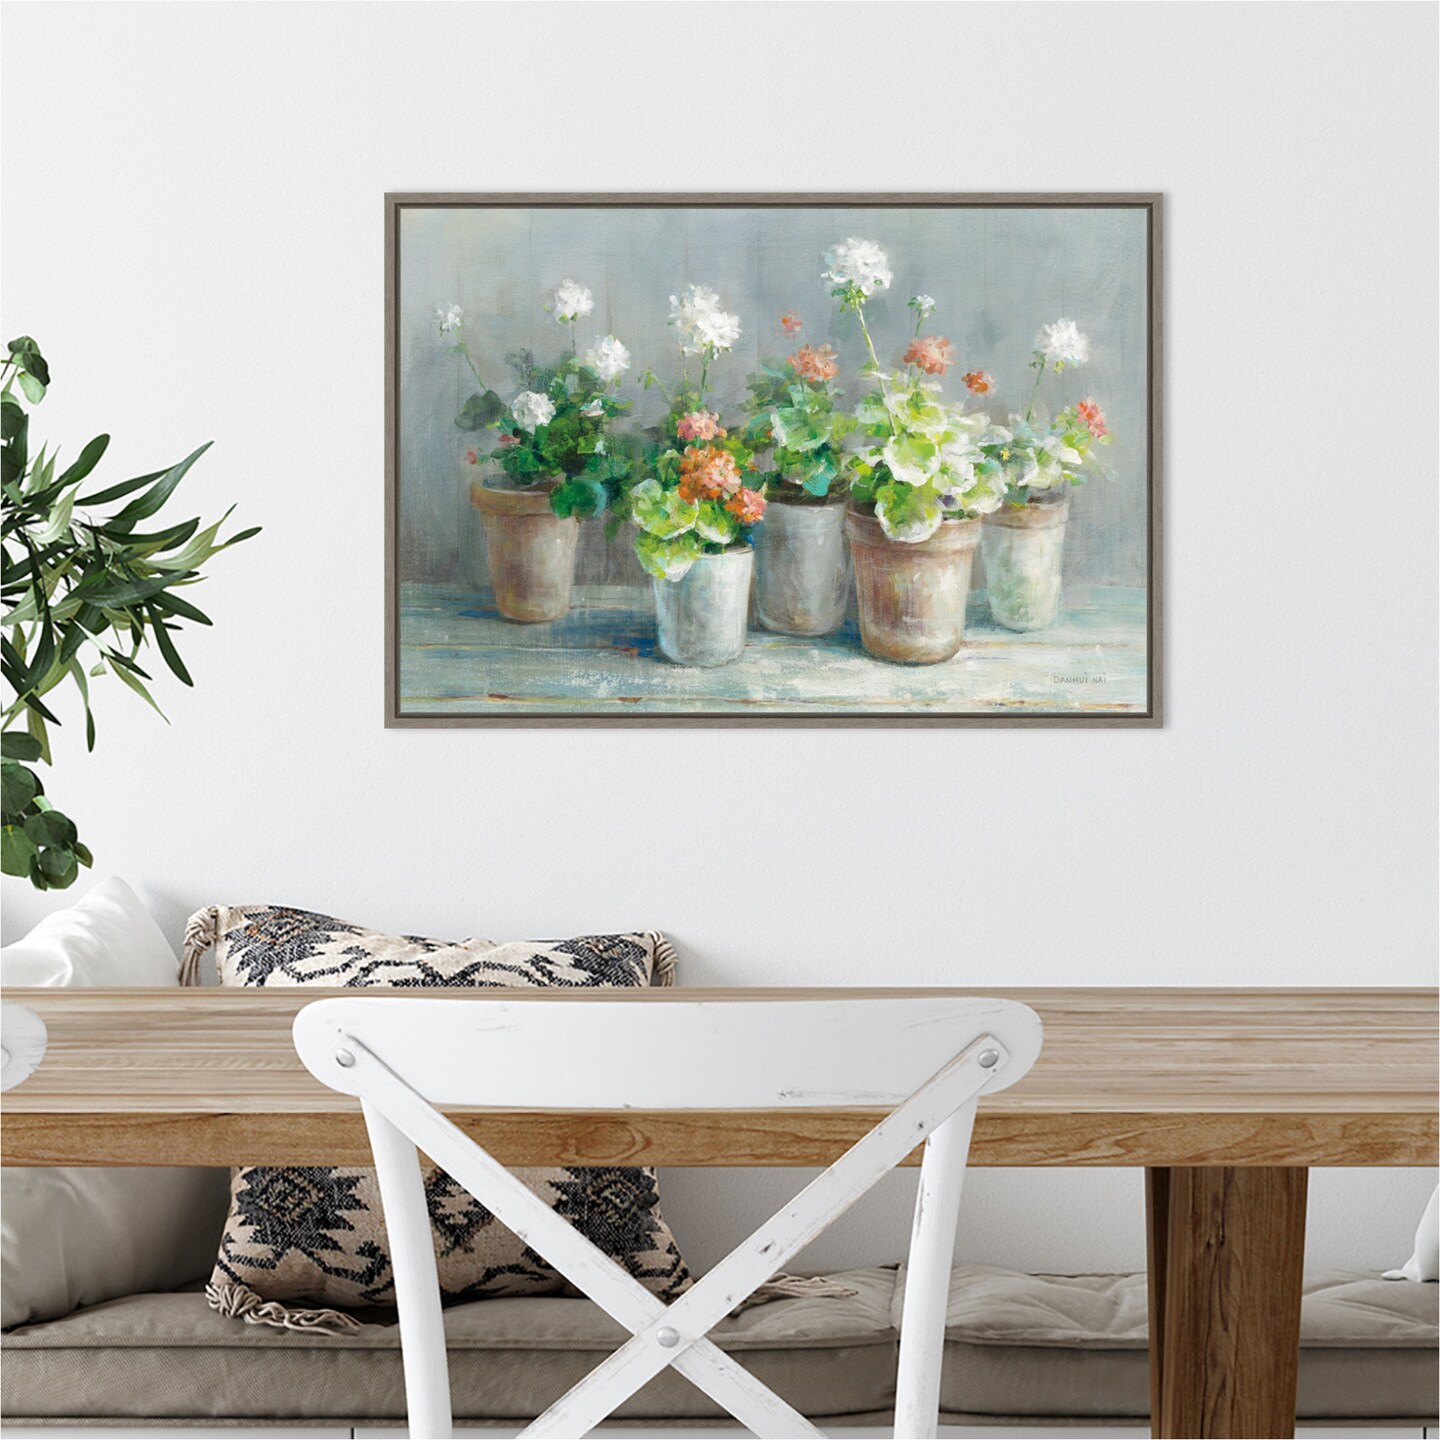 Farmhouse Geraniums in Vases by Danhui Nai 23-in. W x 16-in. H. Canvas Wall Art Print Framed in Grey